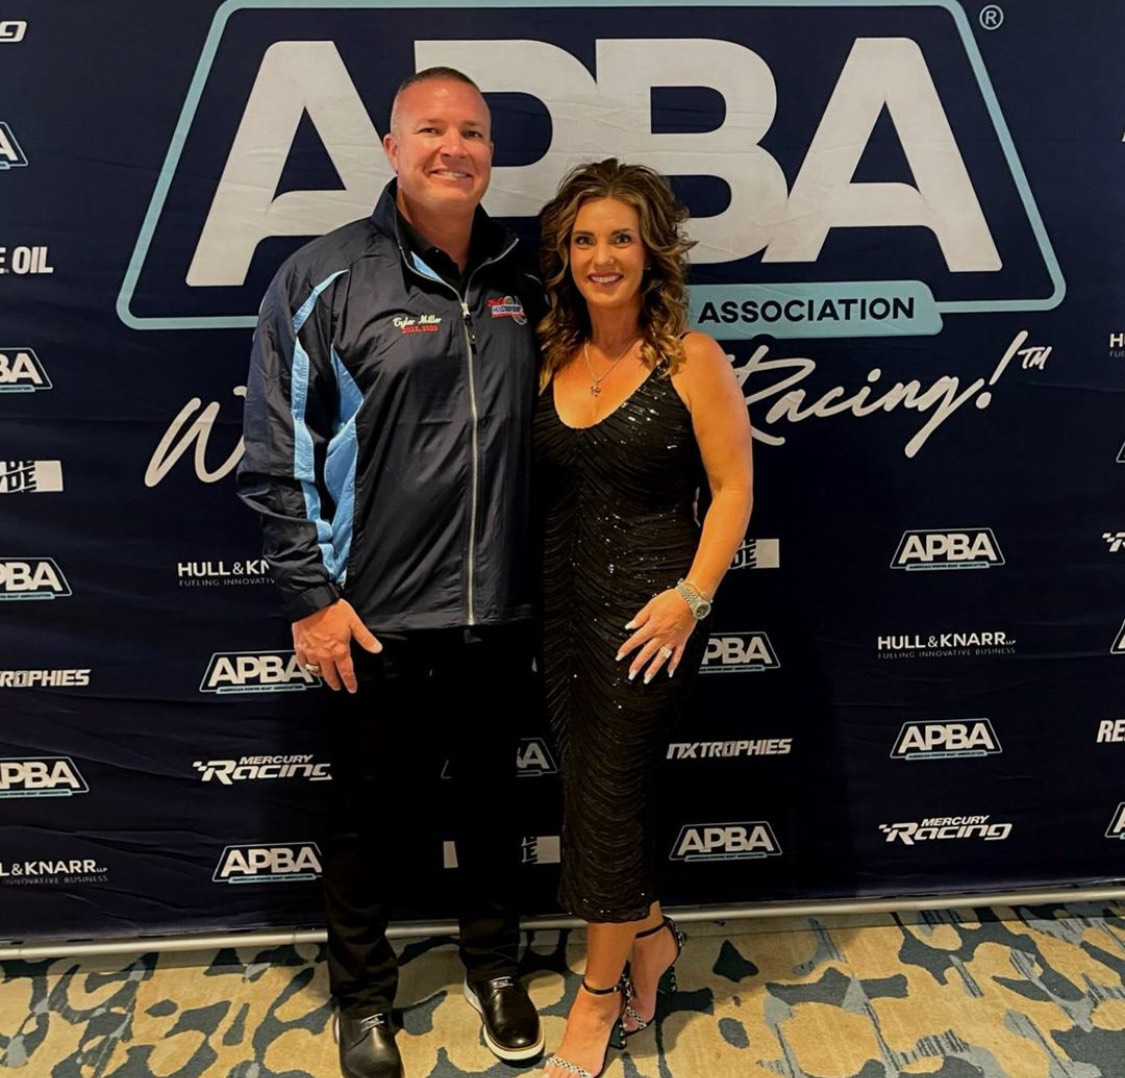 A Touch Of Class—Excerpts From Tyler Miller’s APBA Hall Of Champions Acceptance Speech